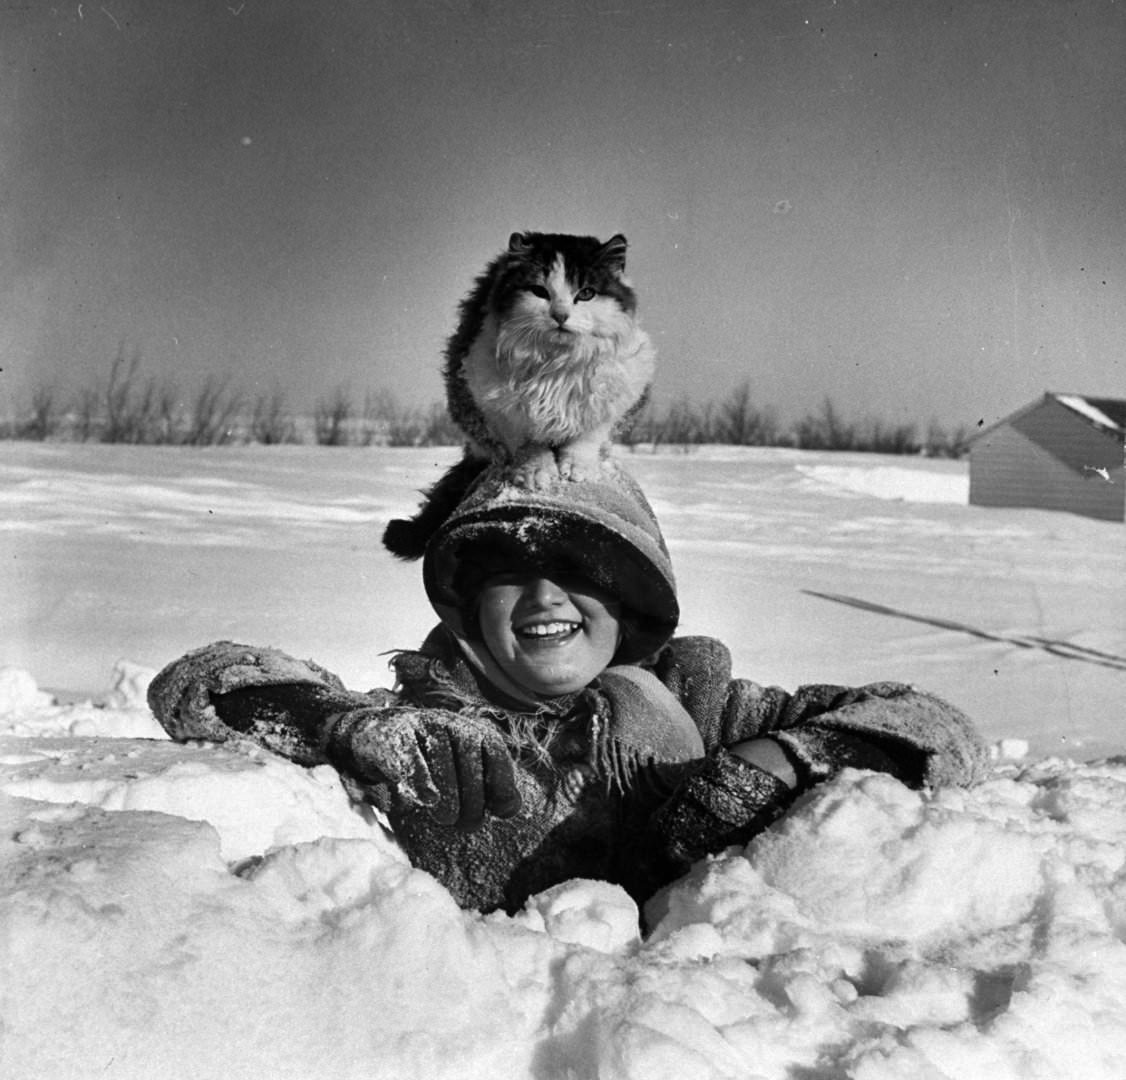 Sharon Adams, 10, Playing In A Snow Drift As Her Cat Maintains Its Comfortable Perch Atop Her Head, 1952